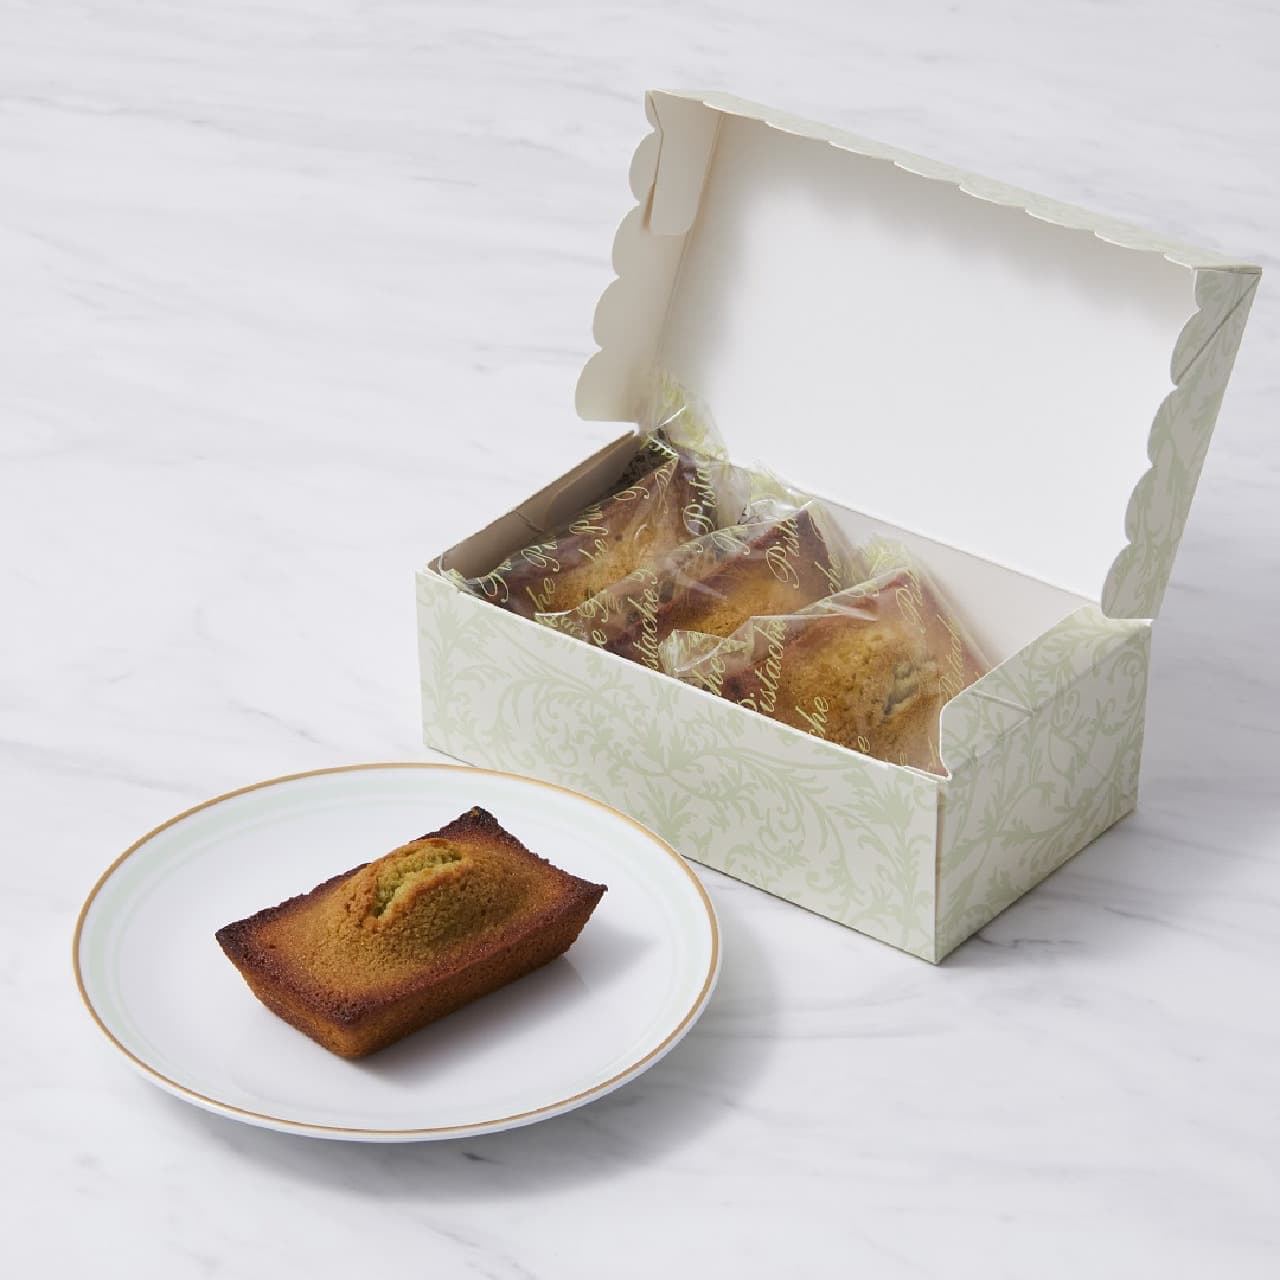 A collection of stylish Ladurée sweets gifts that can be easily purchased.